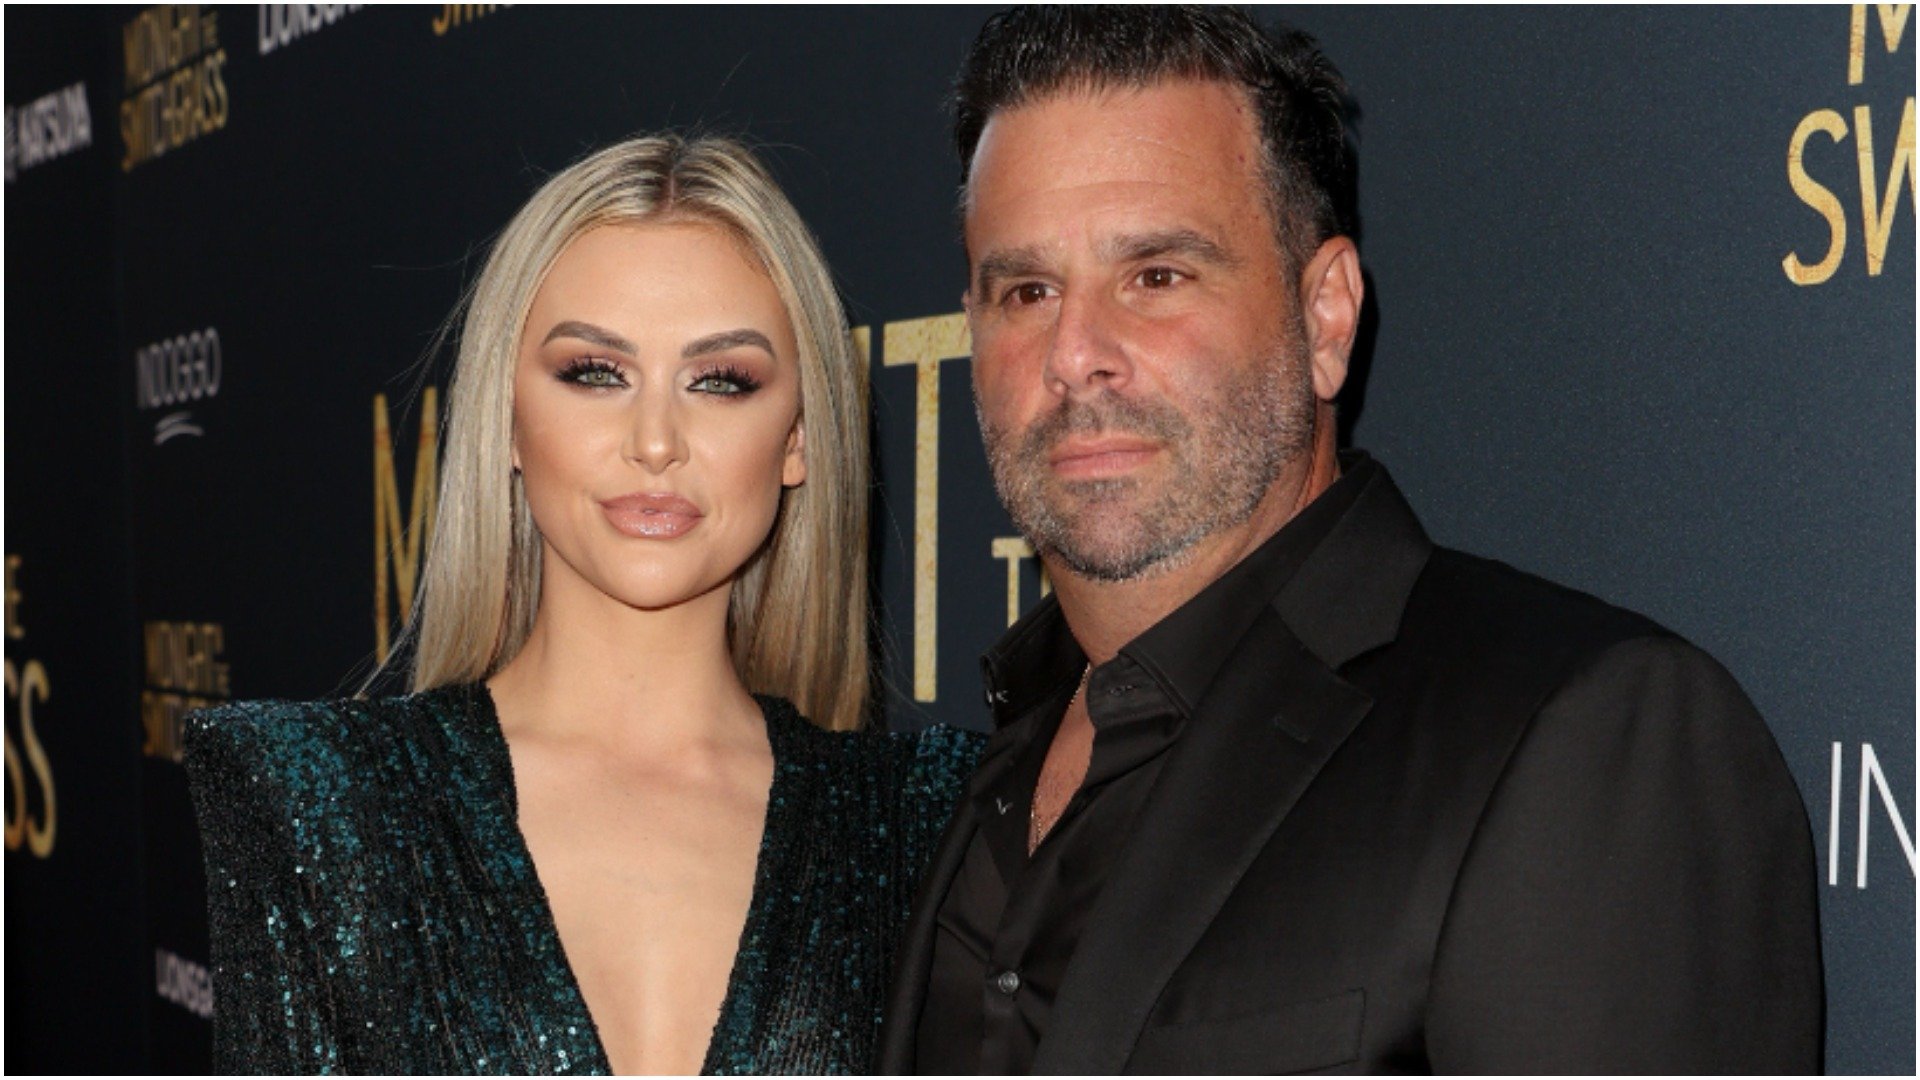 Lala Kent and Randall Emmett from Vanderpump Rules arrive at his movie premiere this summer